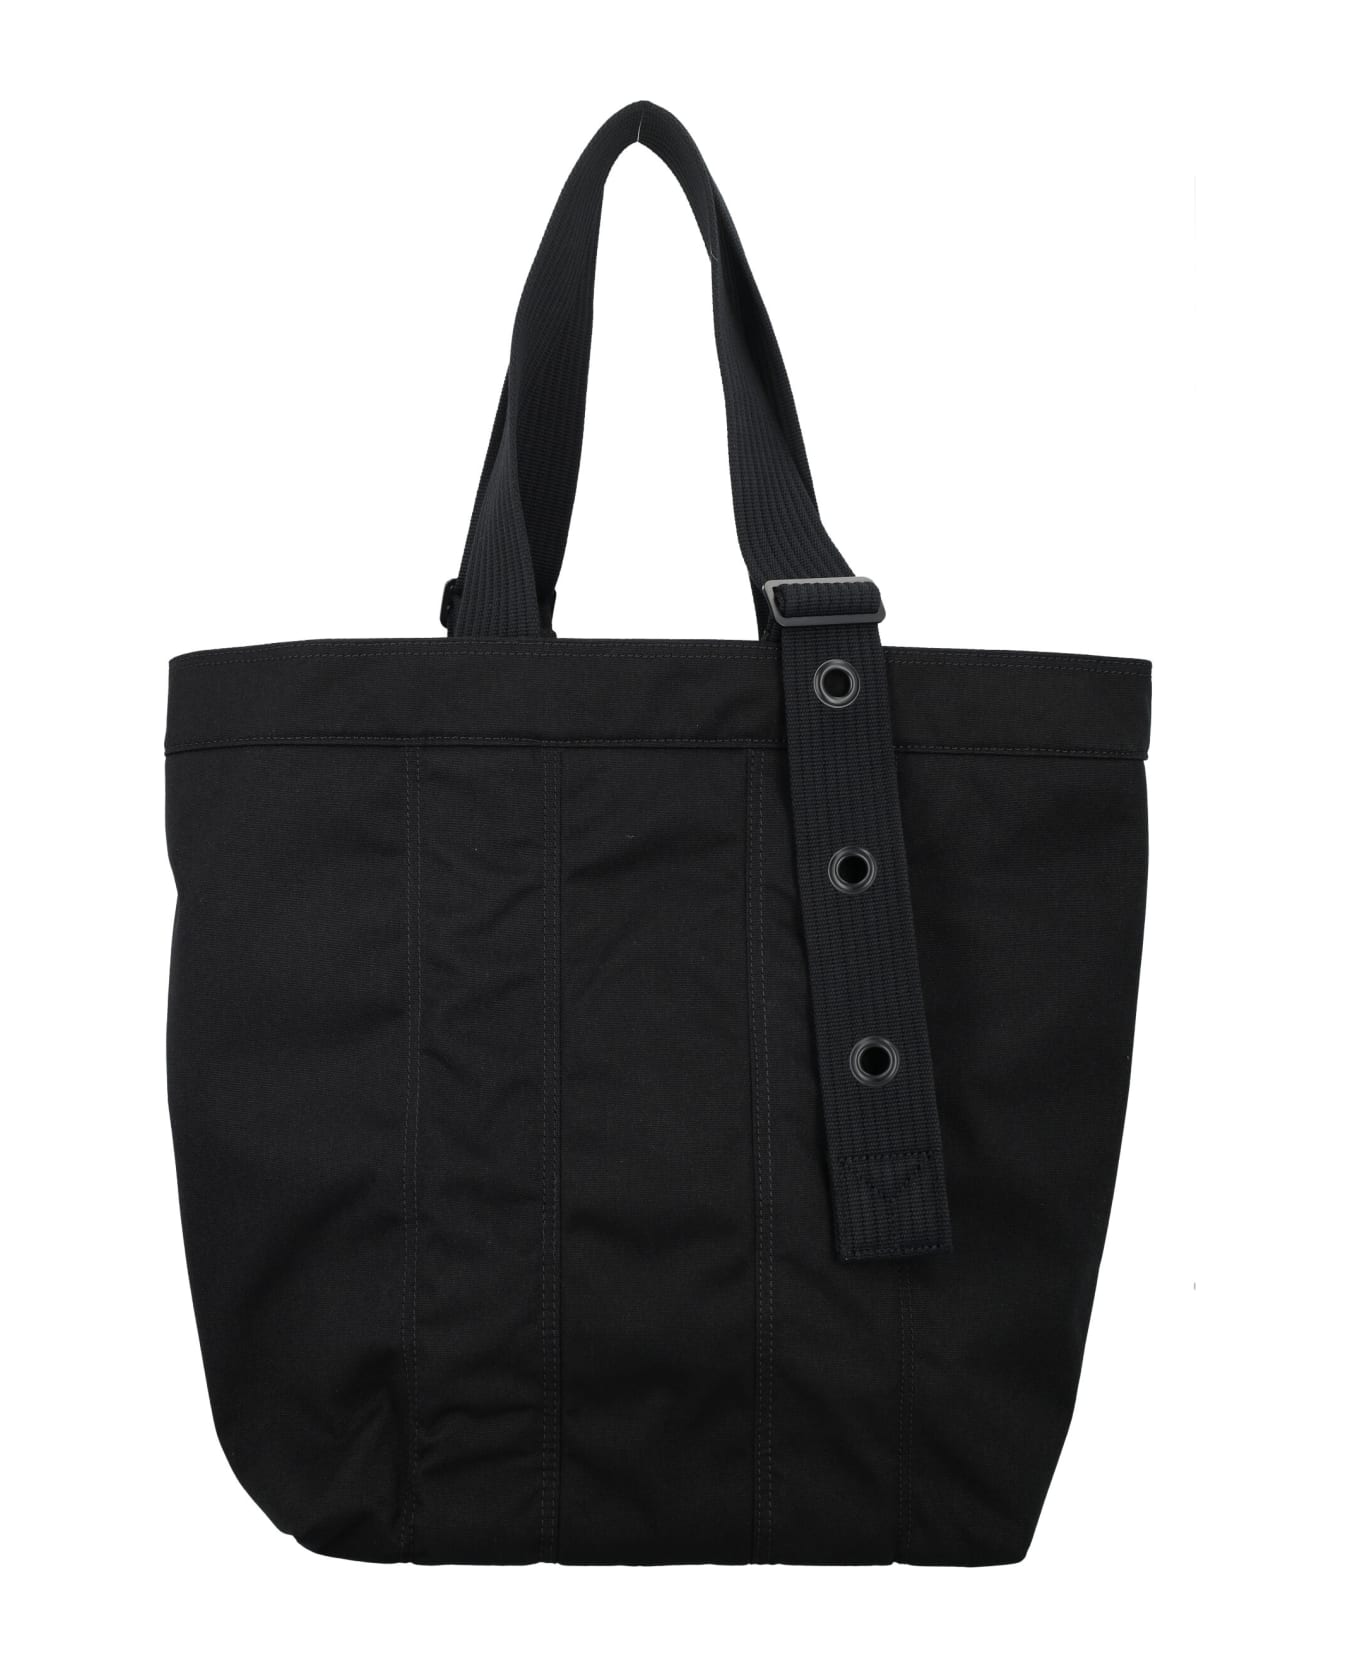 Y-3 Tote - BLACK トートバッグ